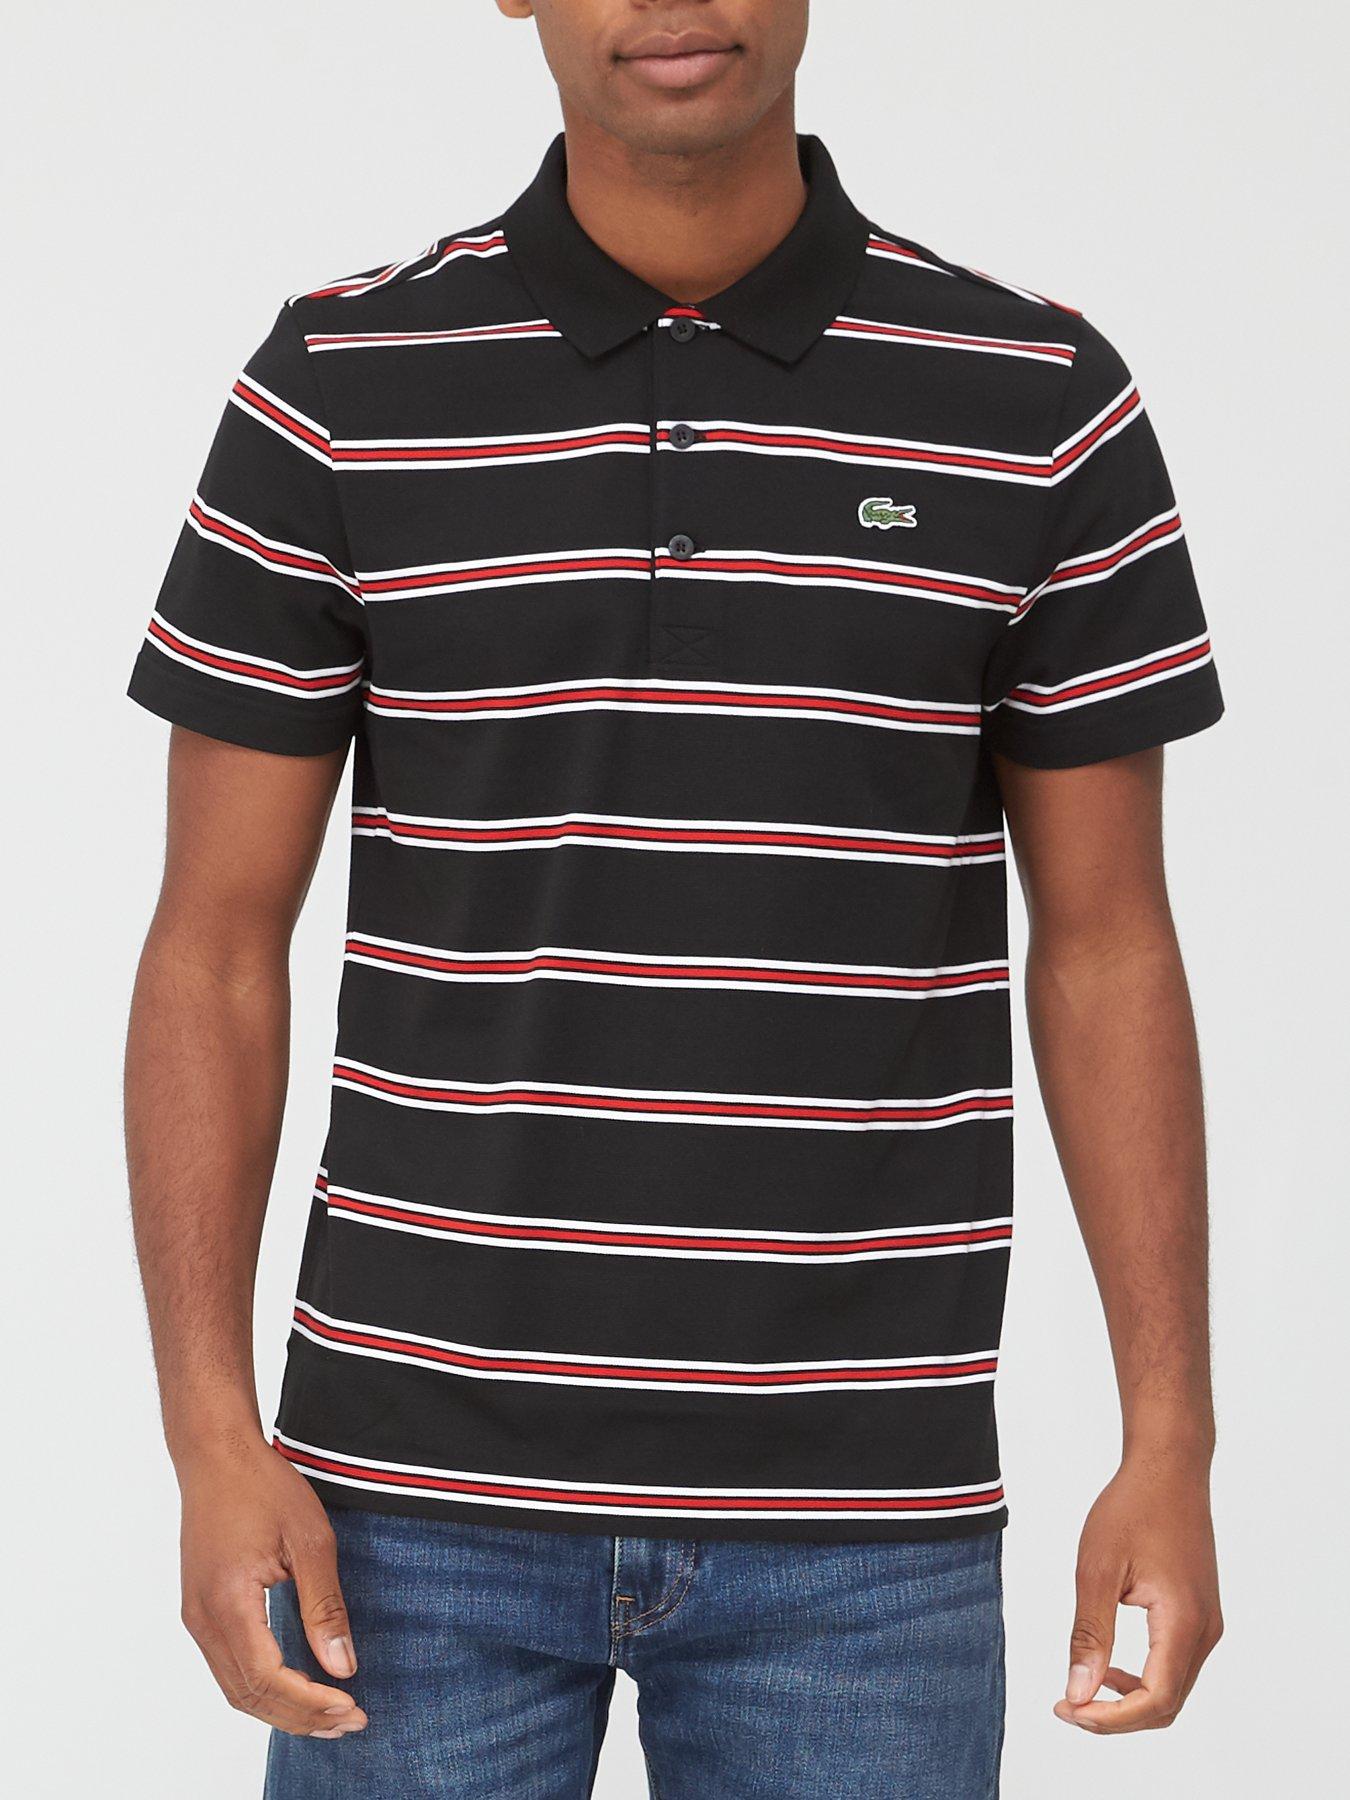 black and red lacoste shirt